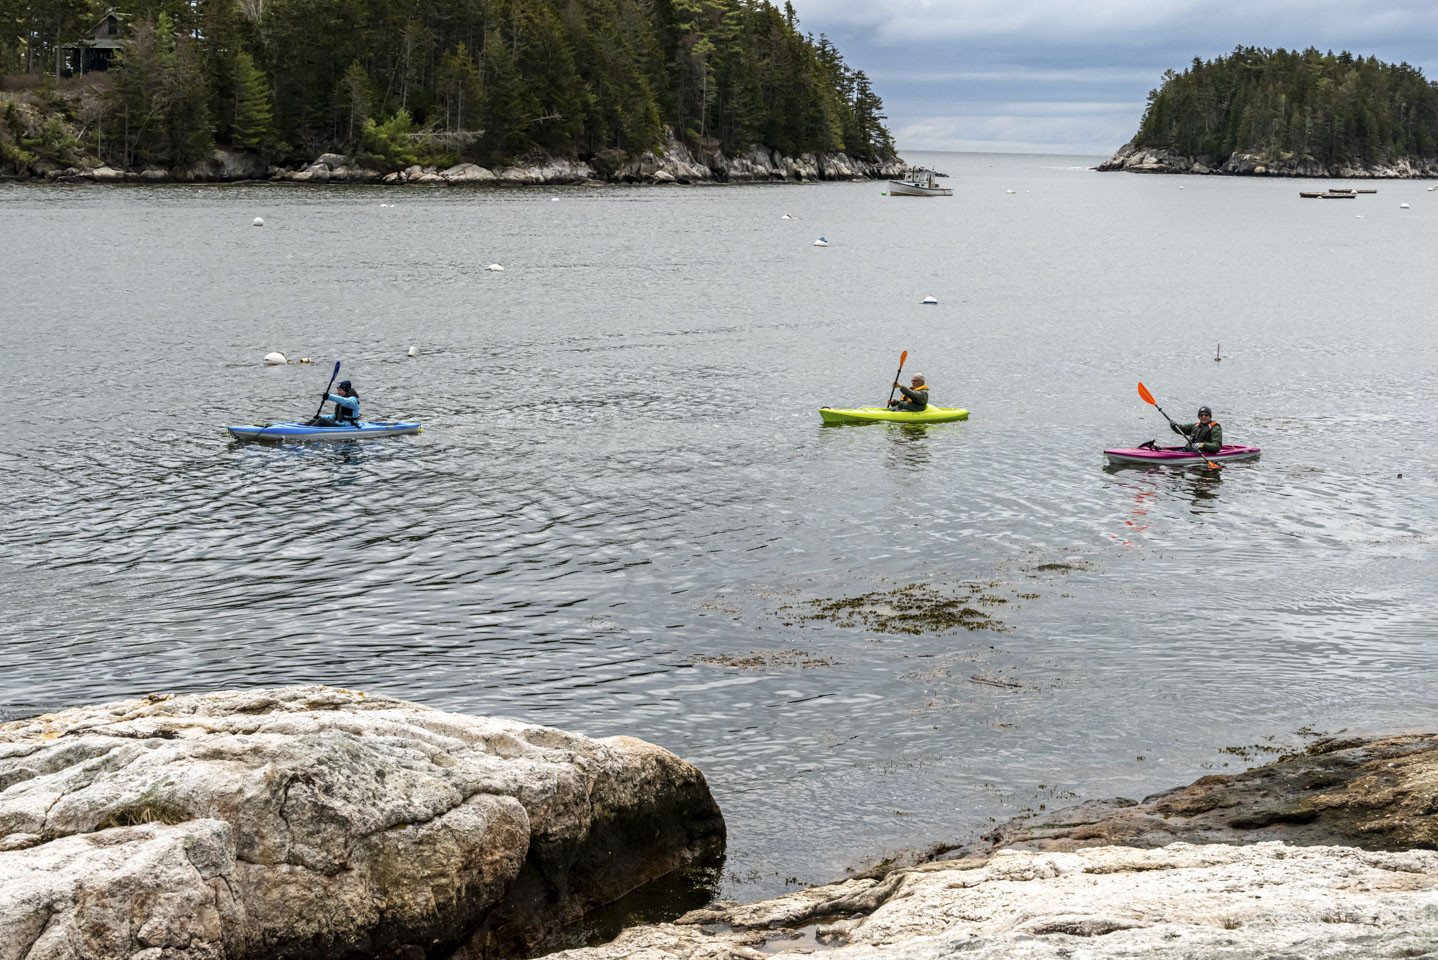 3 kayakers in a bay with islands in the distance